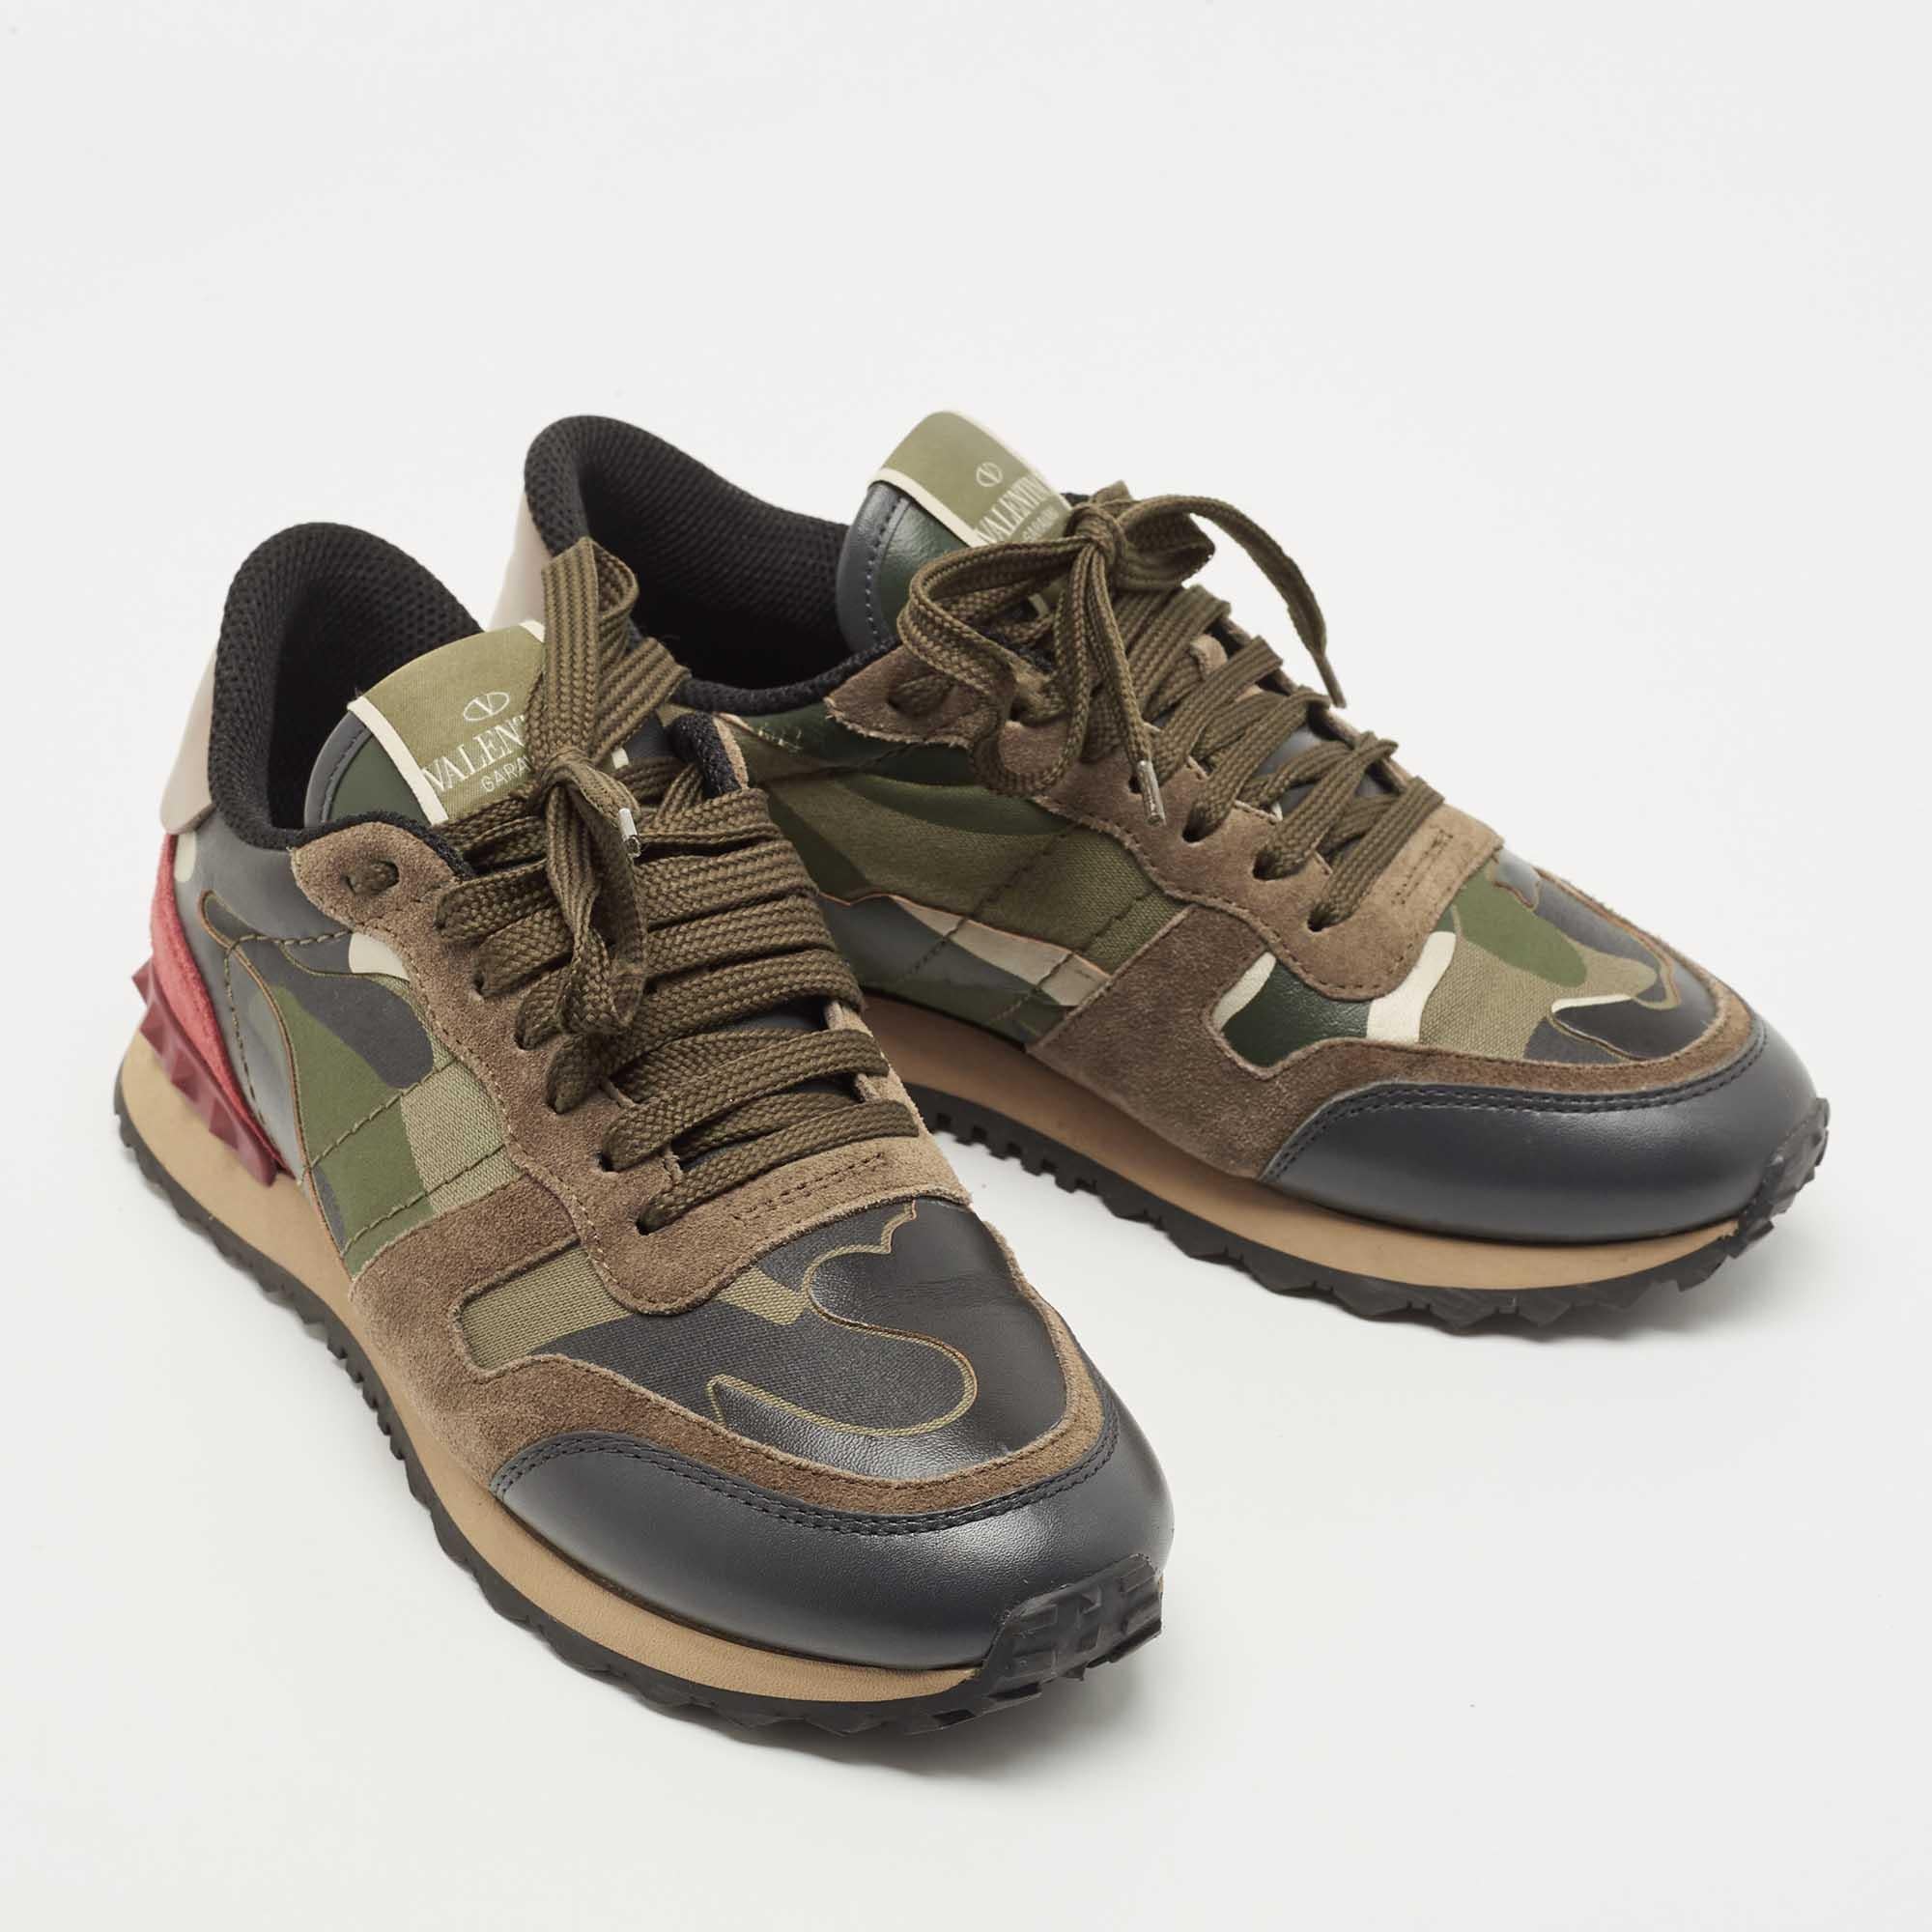 Women's Valentino Multicolor Canvas Rockrunner Camouflage Low Top Sneakers Size 37.5